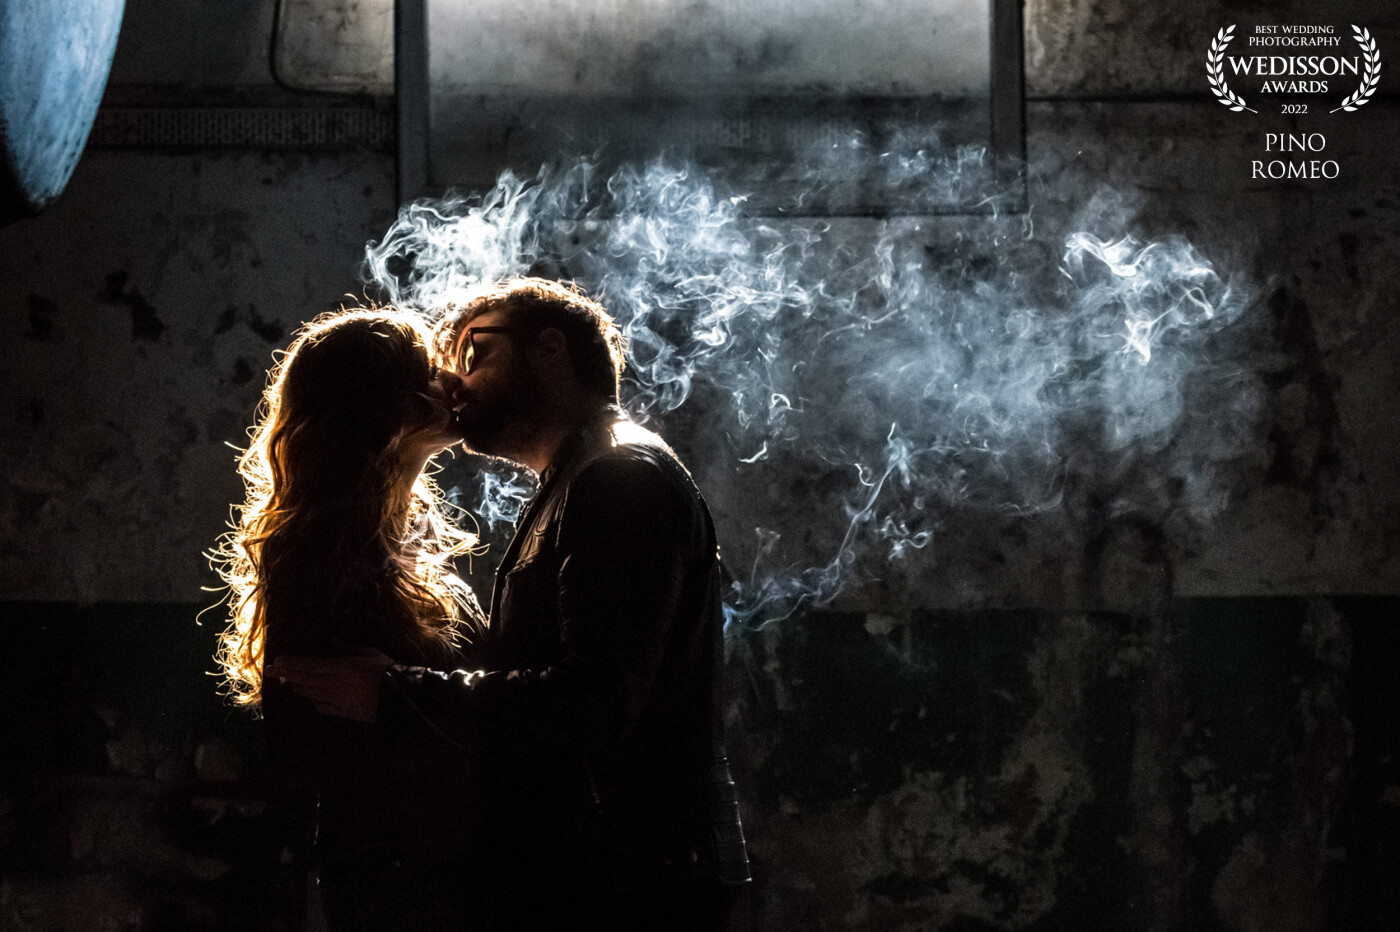 A few months before their wedding, Vaïssa and Benoit met in an old factory for an engagement session. It was a very cold and bright winter day.  The condensation of their breath, in the light of the window well, was like a wild smoke.